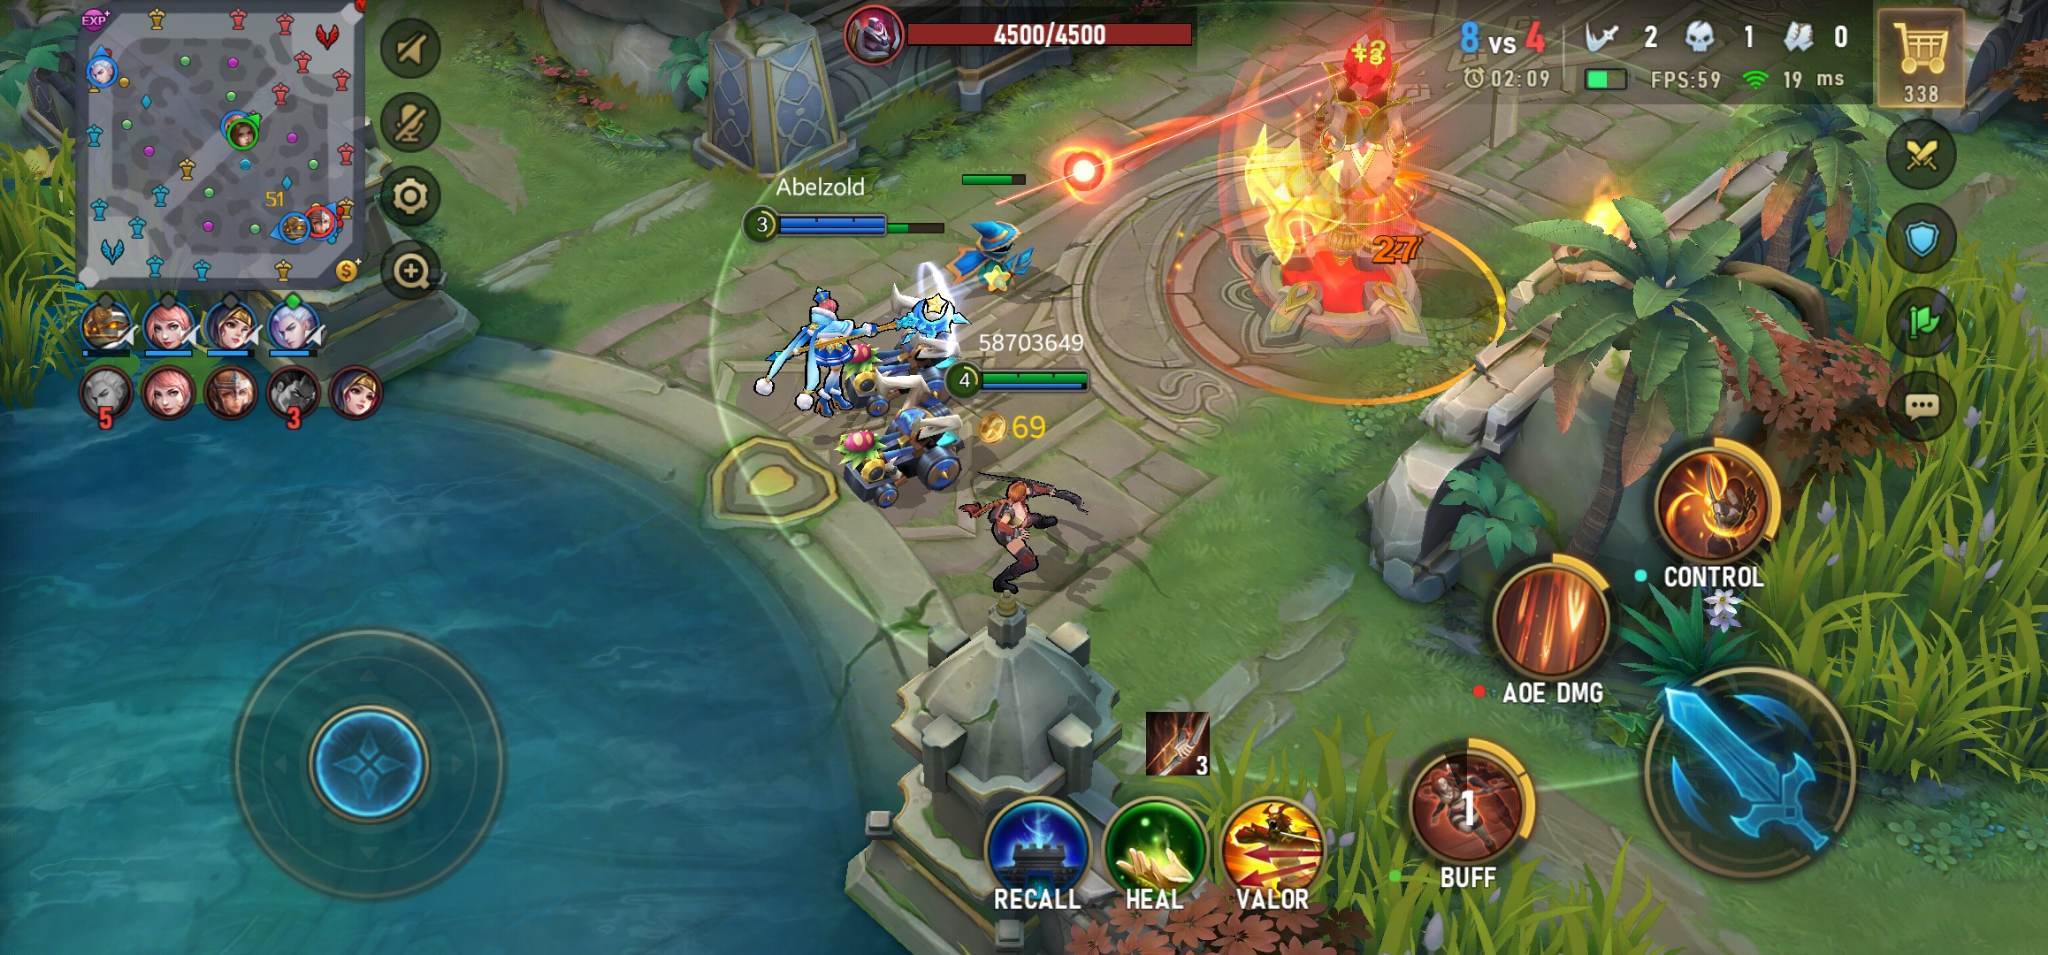 If You Really Like Wild Rift, Arena Of Valor, Or Mobile Legends: Bang Bang,  You Might Like This Game - League Of Legends: Wild Rift - Mobile Legends:  Bang Bang - Arena Of Valor - Taptap